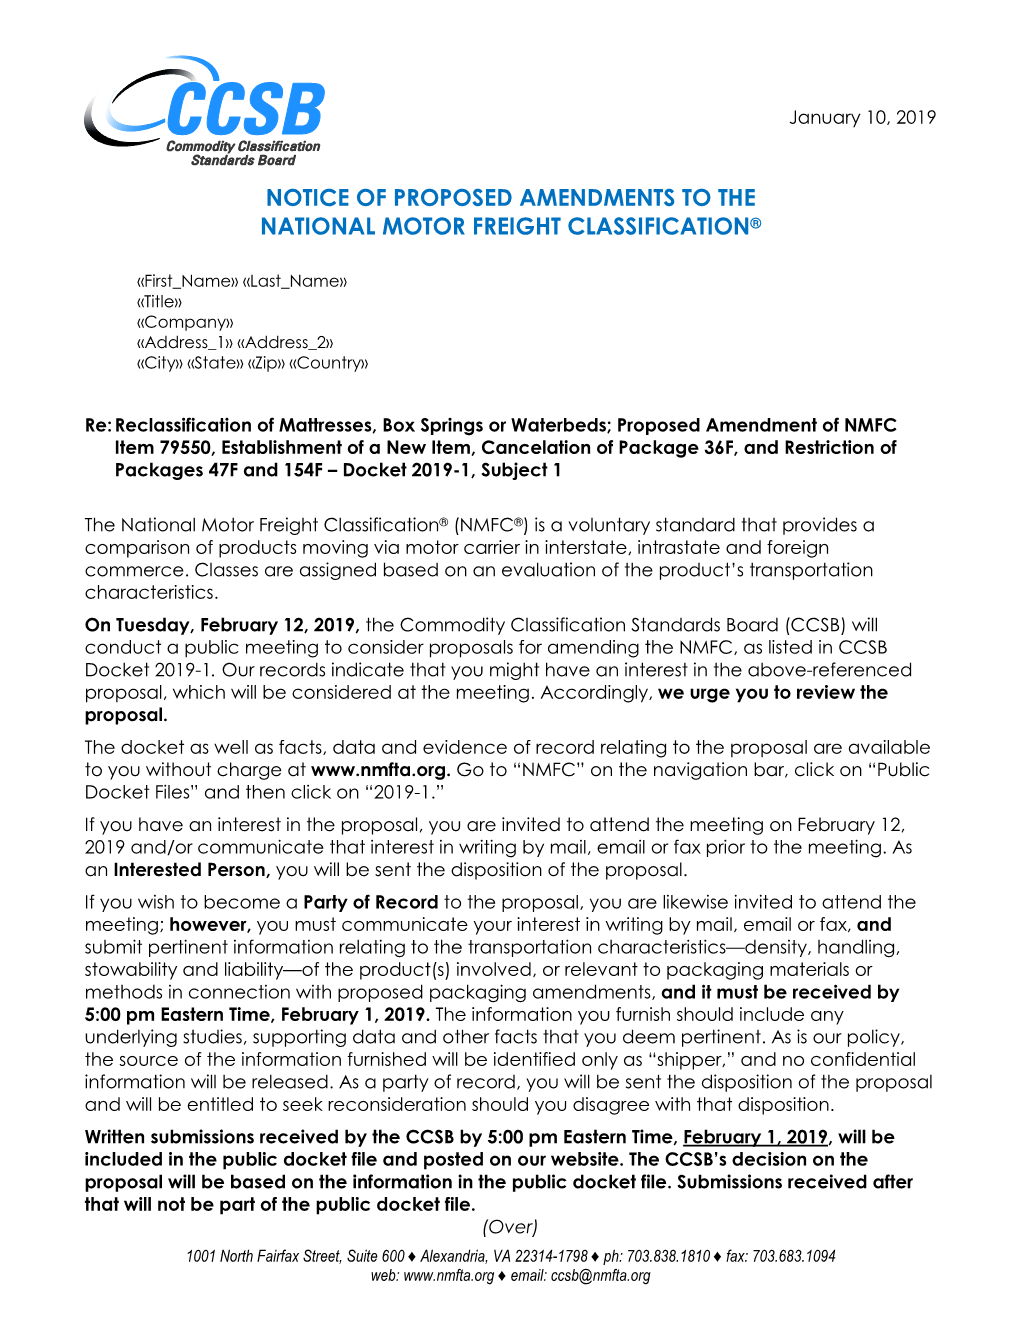 Notice of Proposed Amendments to the National Motor Freight Classification®